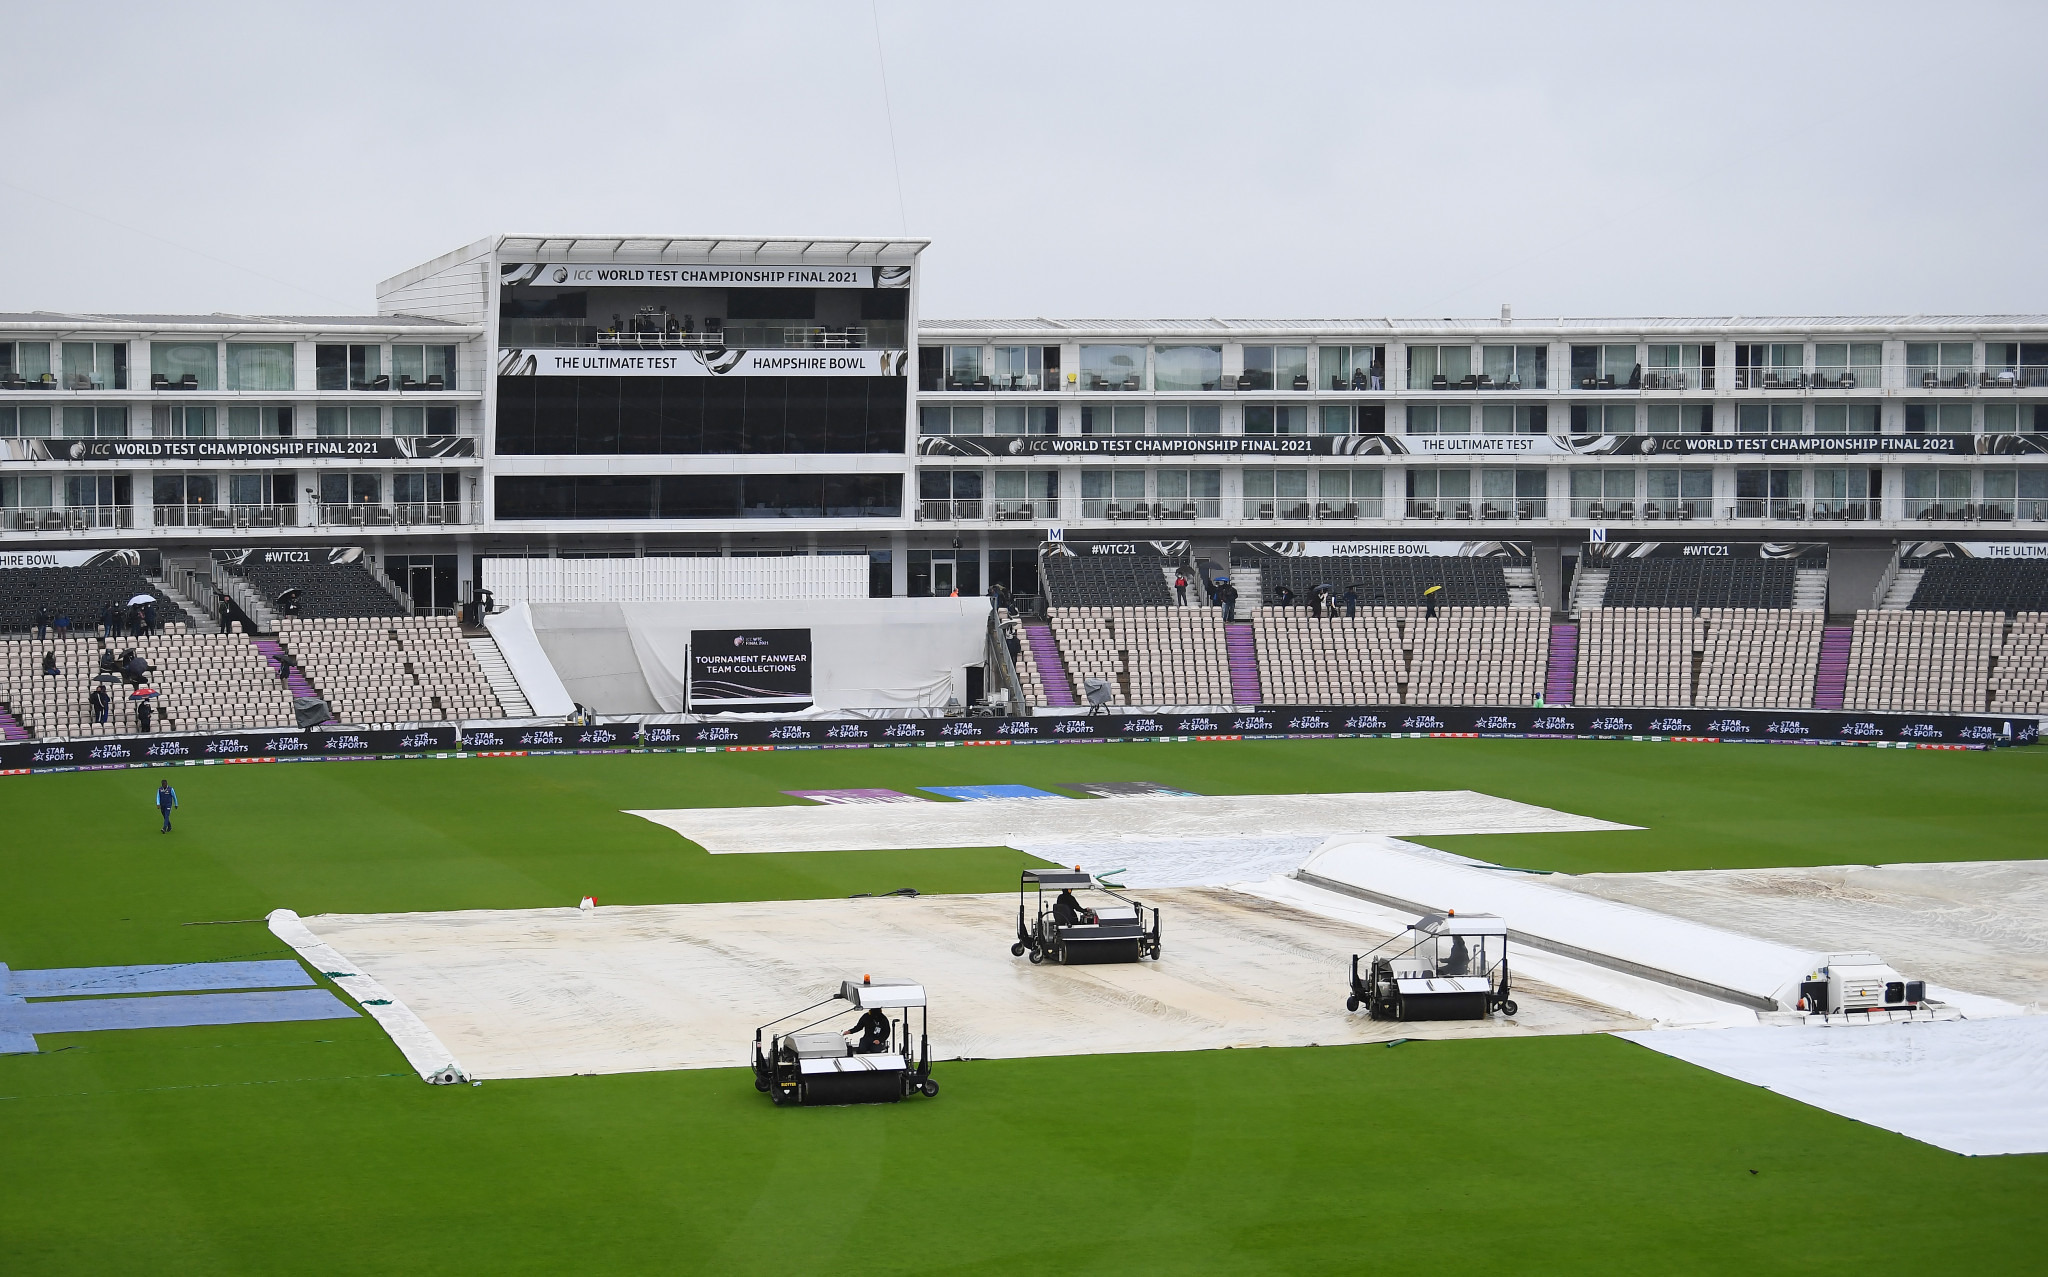 Rain washes out fourth day of World Test Championship Final